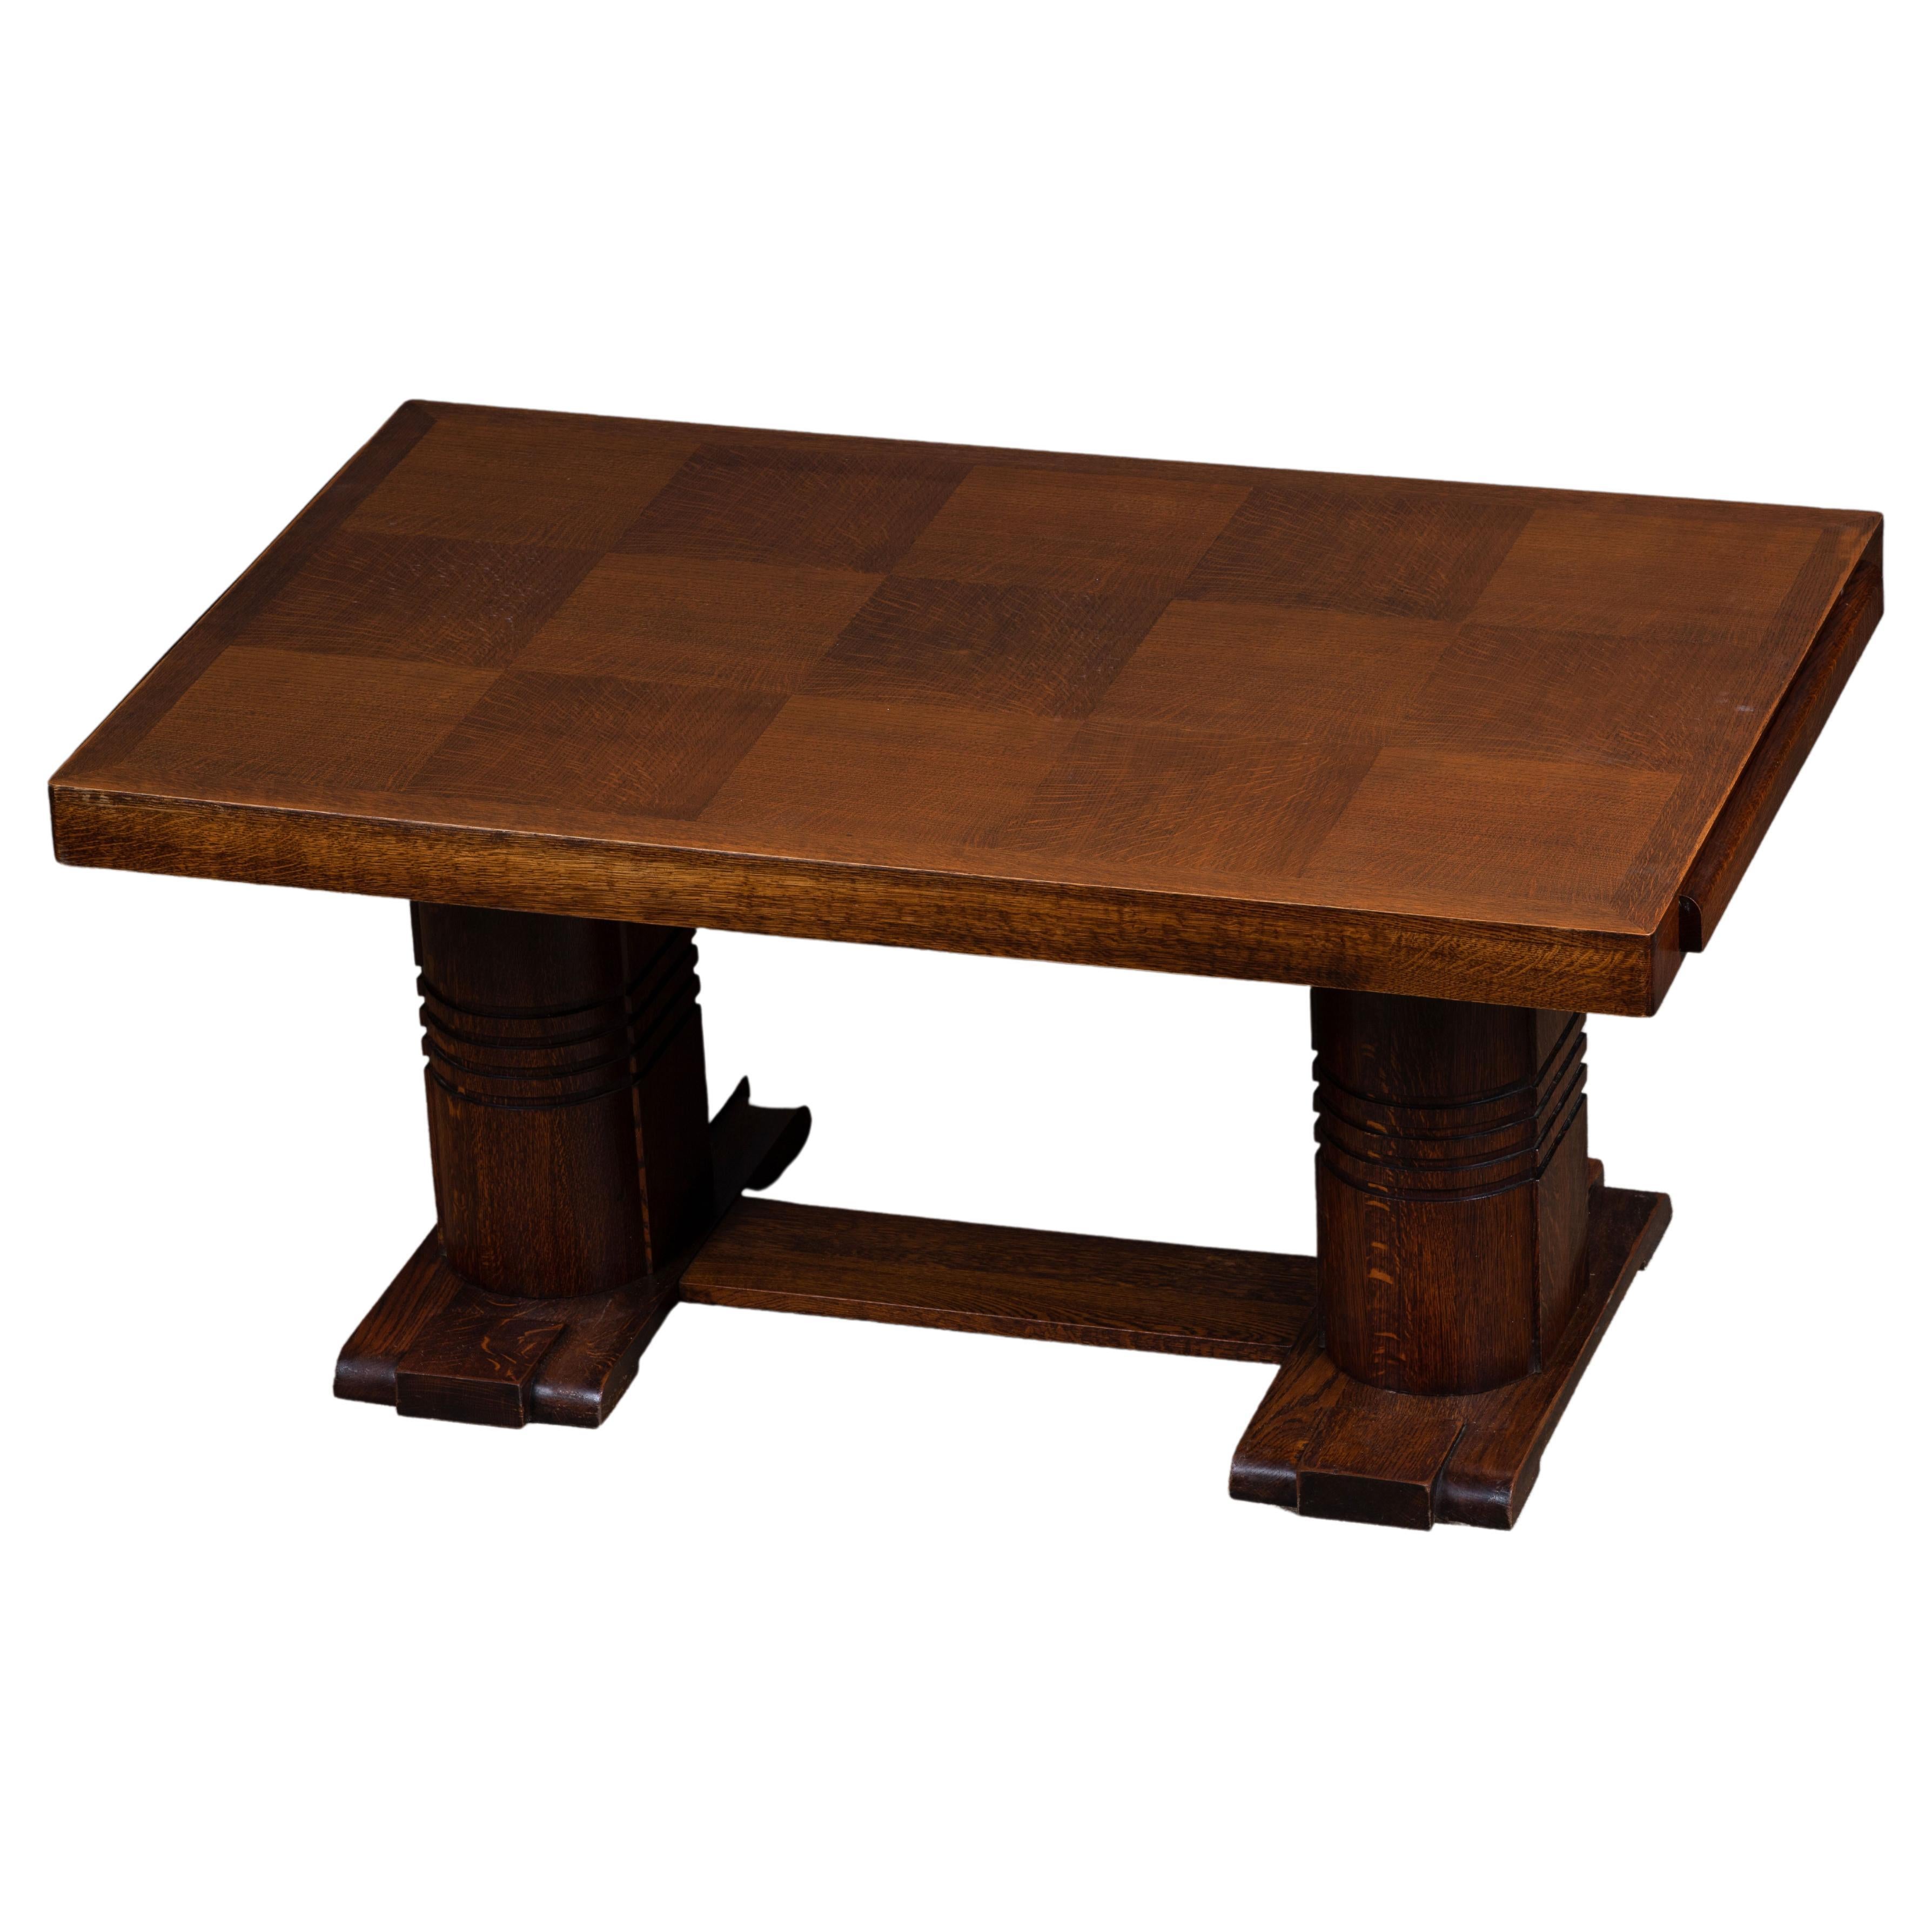 French Art Deco dining table. The table features stunning oak sanded wood grain with a stunning patina. The top is encrusted with a marquetry of diamonds. It rests on tall and Brutalist tapered legs.
The table is in excellent original condition,